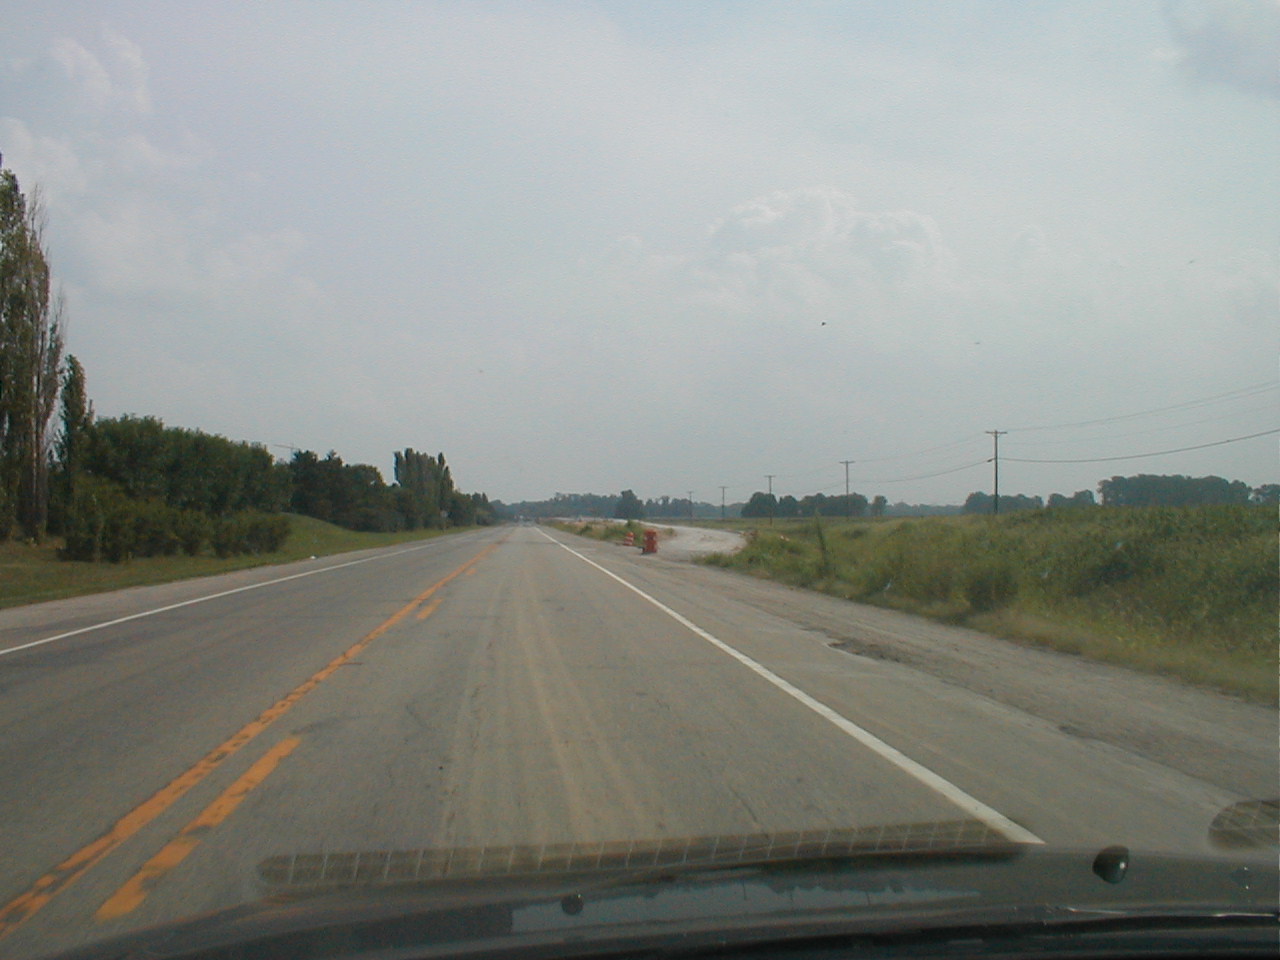 Facing south on US 231 towards the bridge. This is where work on the Indiana approach begins.